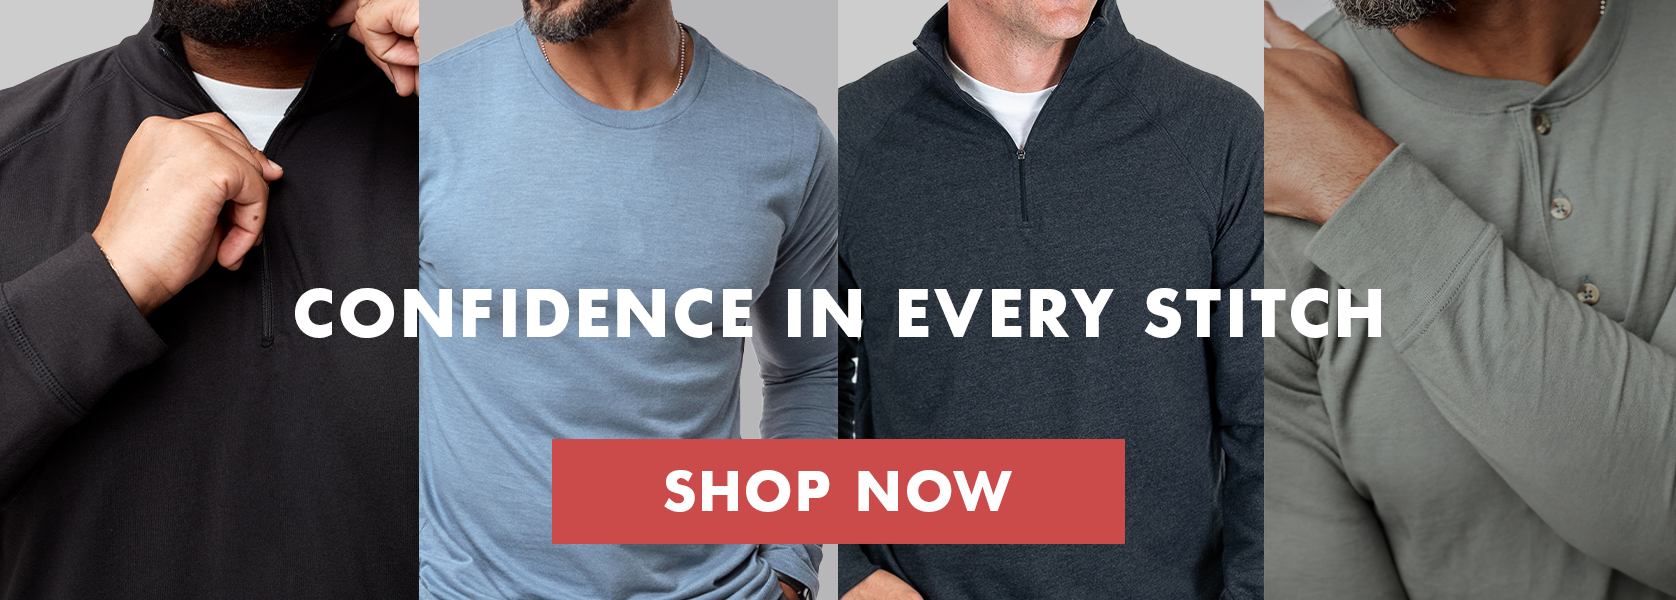 Confidence in Every Stitch | Fresh Clean Threads